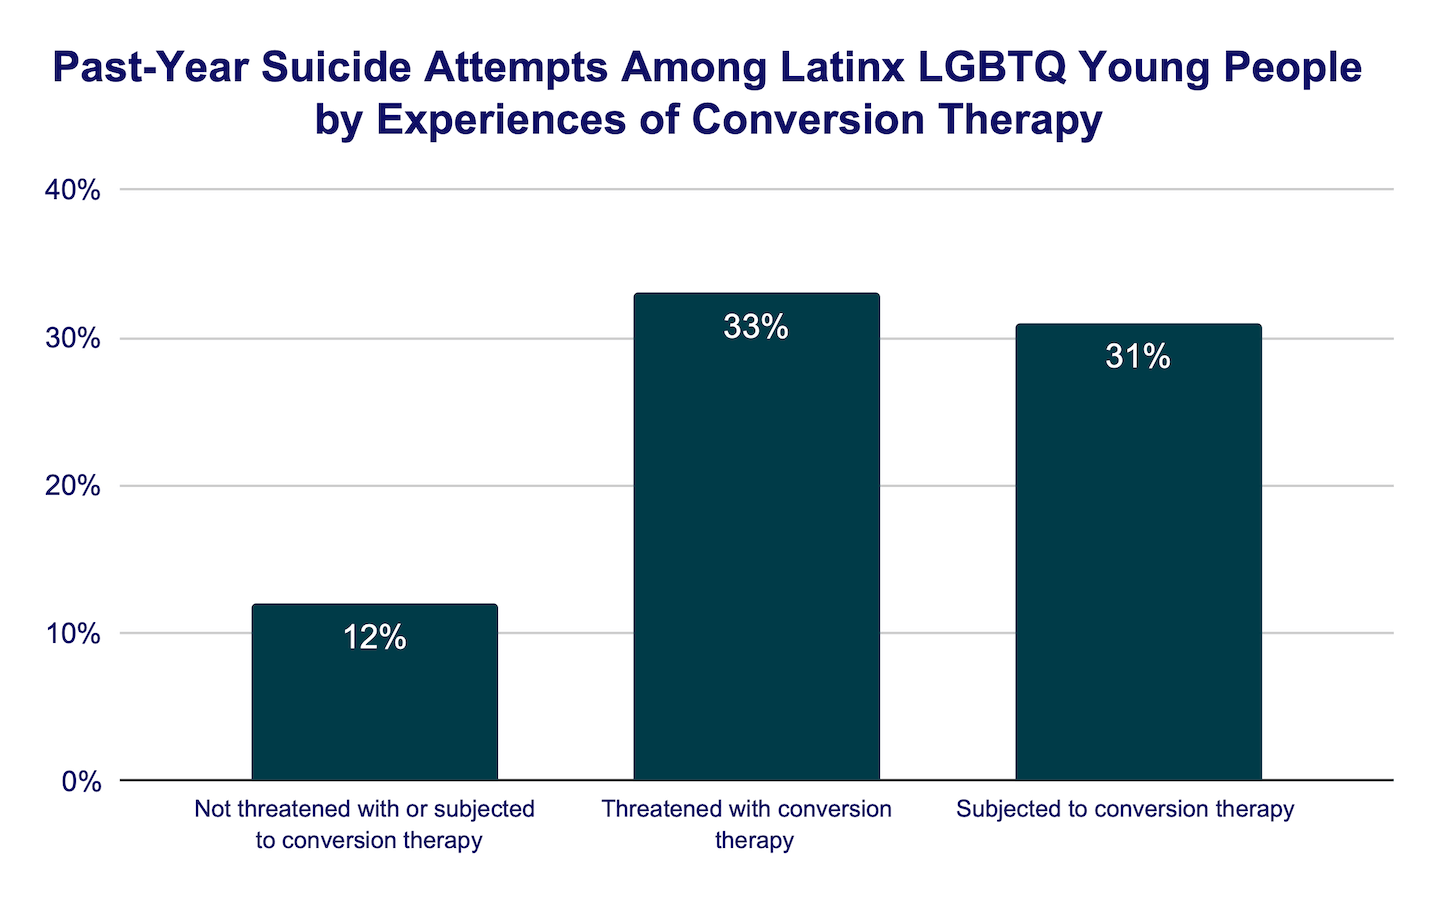 Past-year suicide attempts among Latinx LGBTQ young people by experiences of conversion therapy bar graph